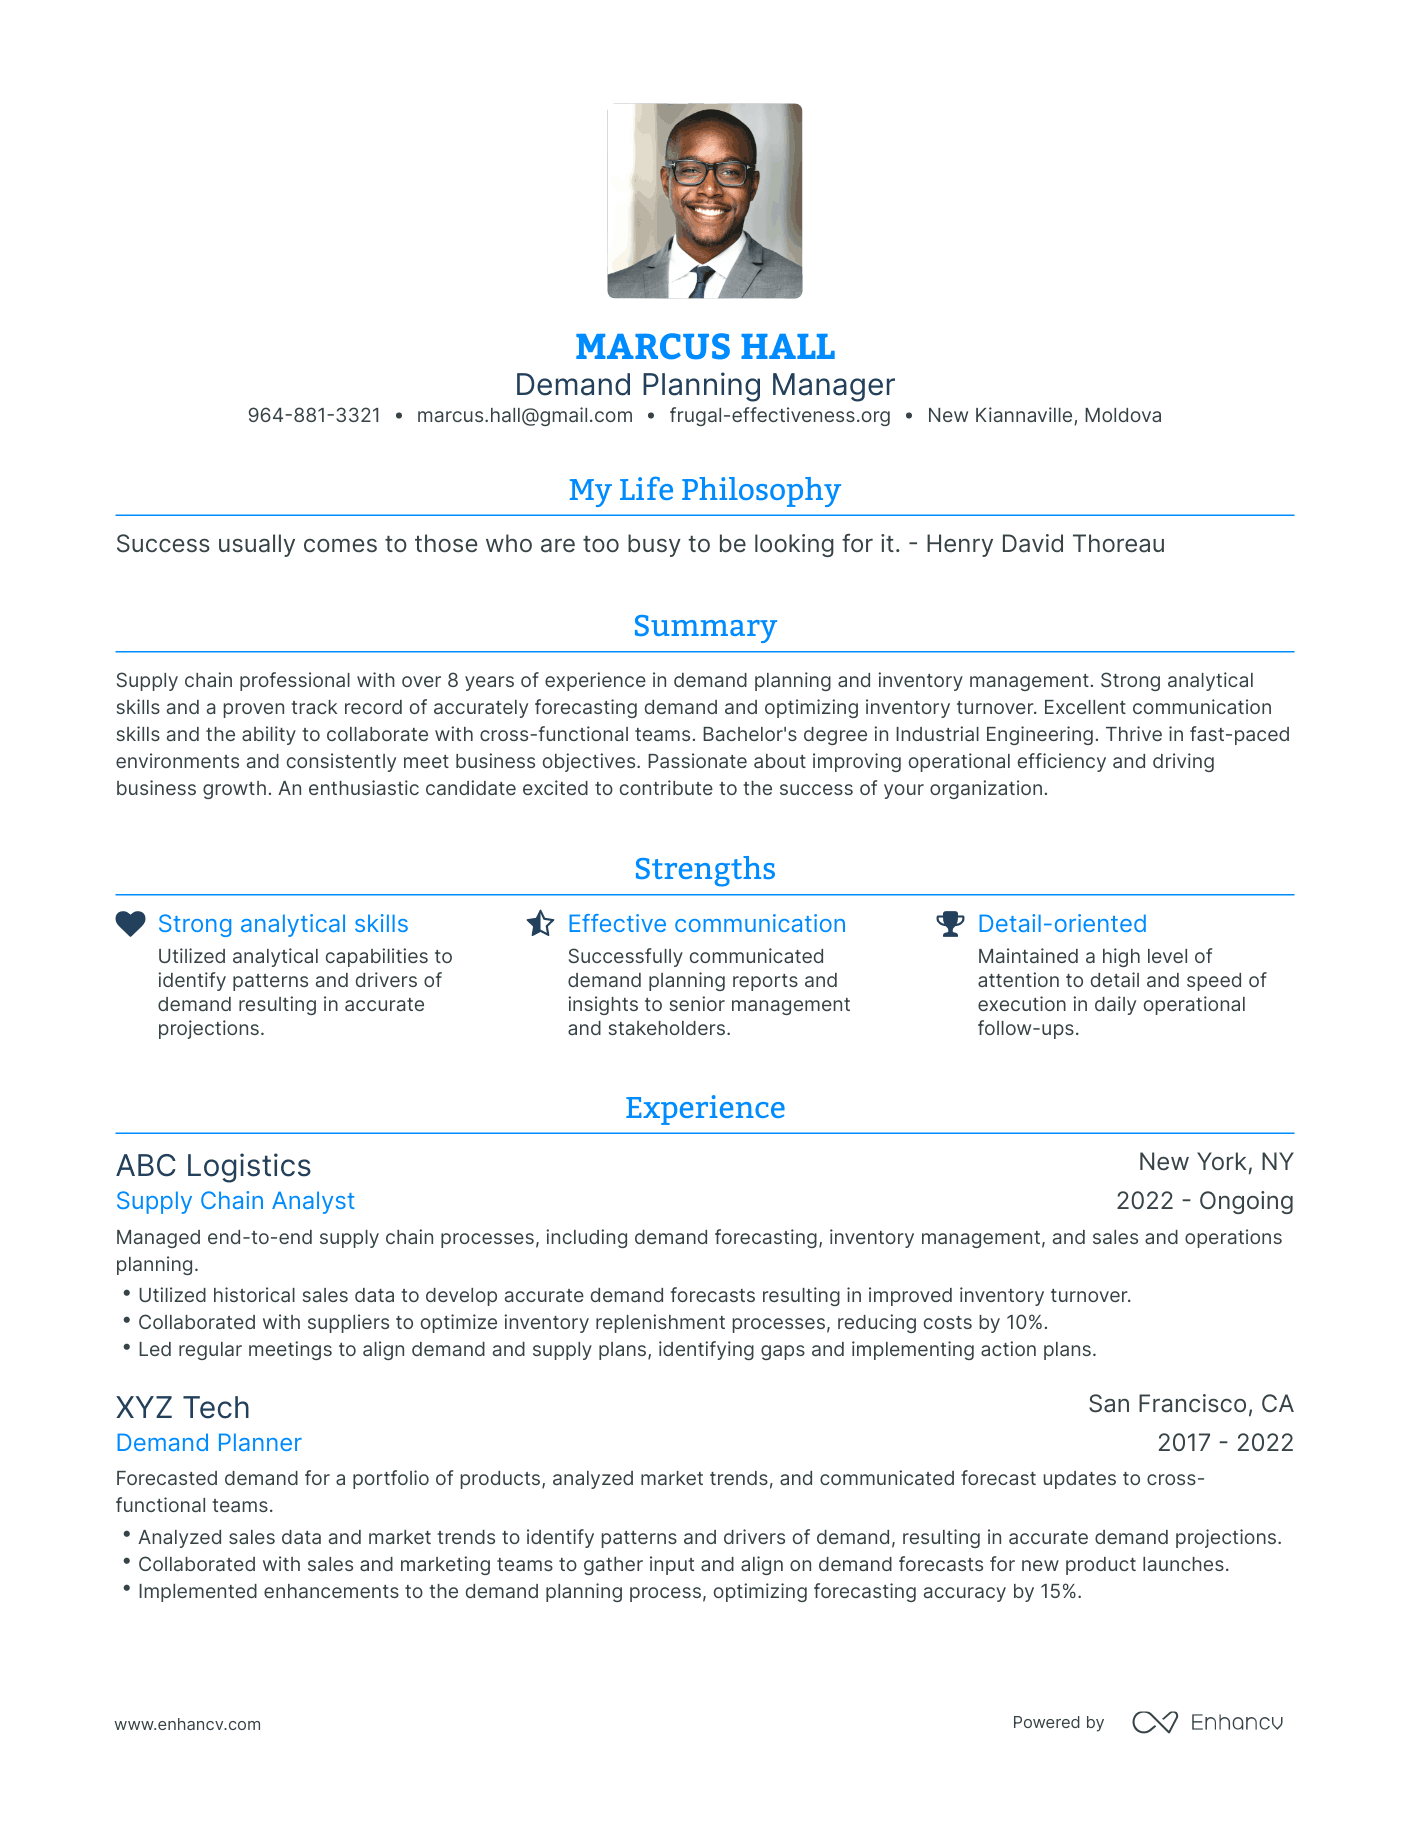 Modern Demand Planning Manager Resume Example